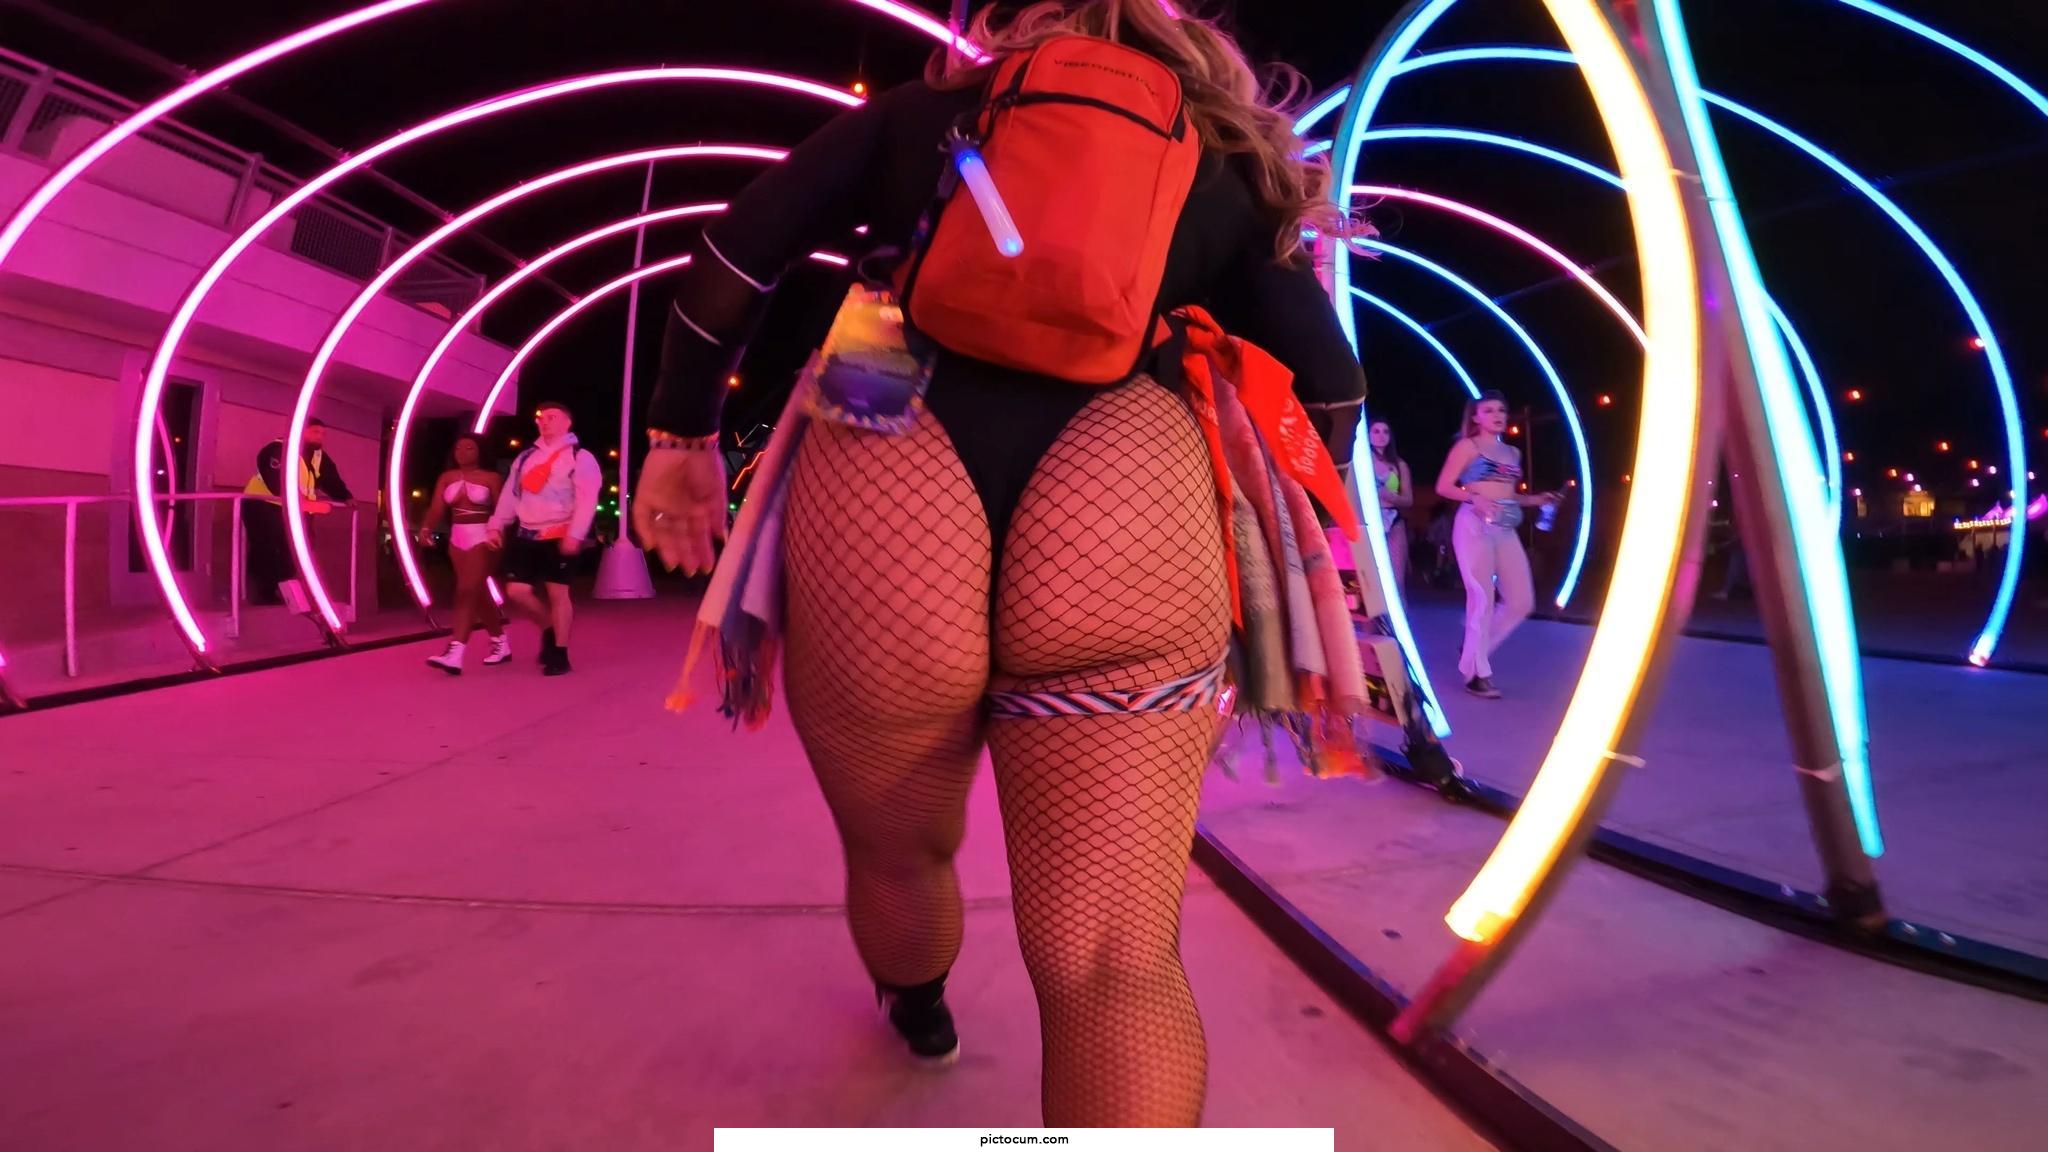 Did you get to see my rave booty at EDC?